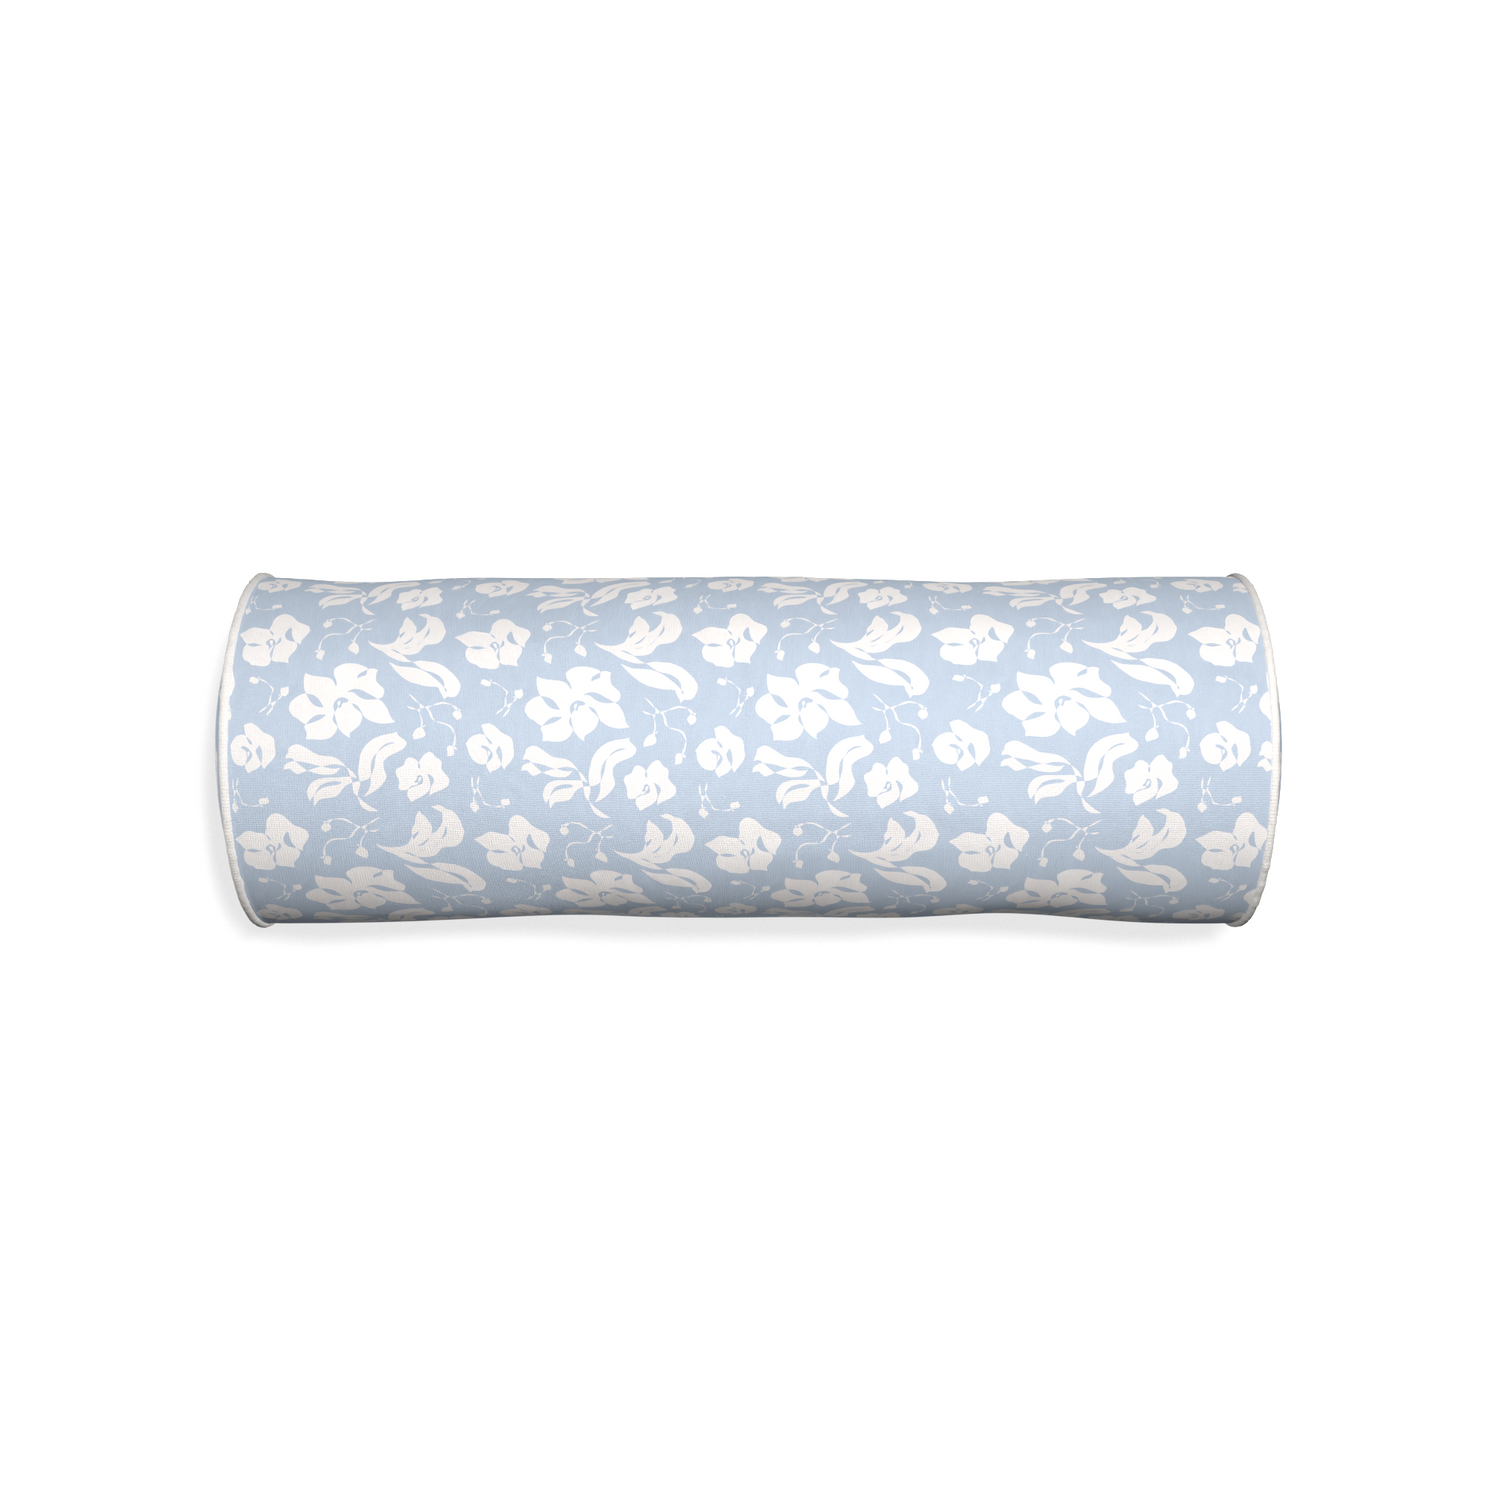 Bolster georgia custom pillow with snow piping on white background